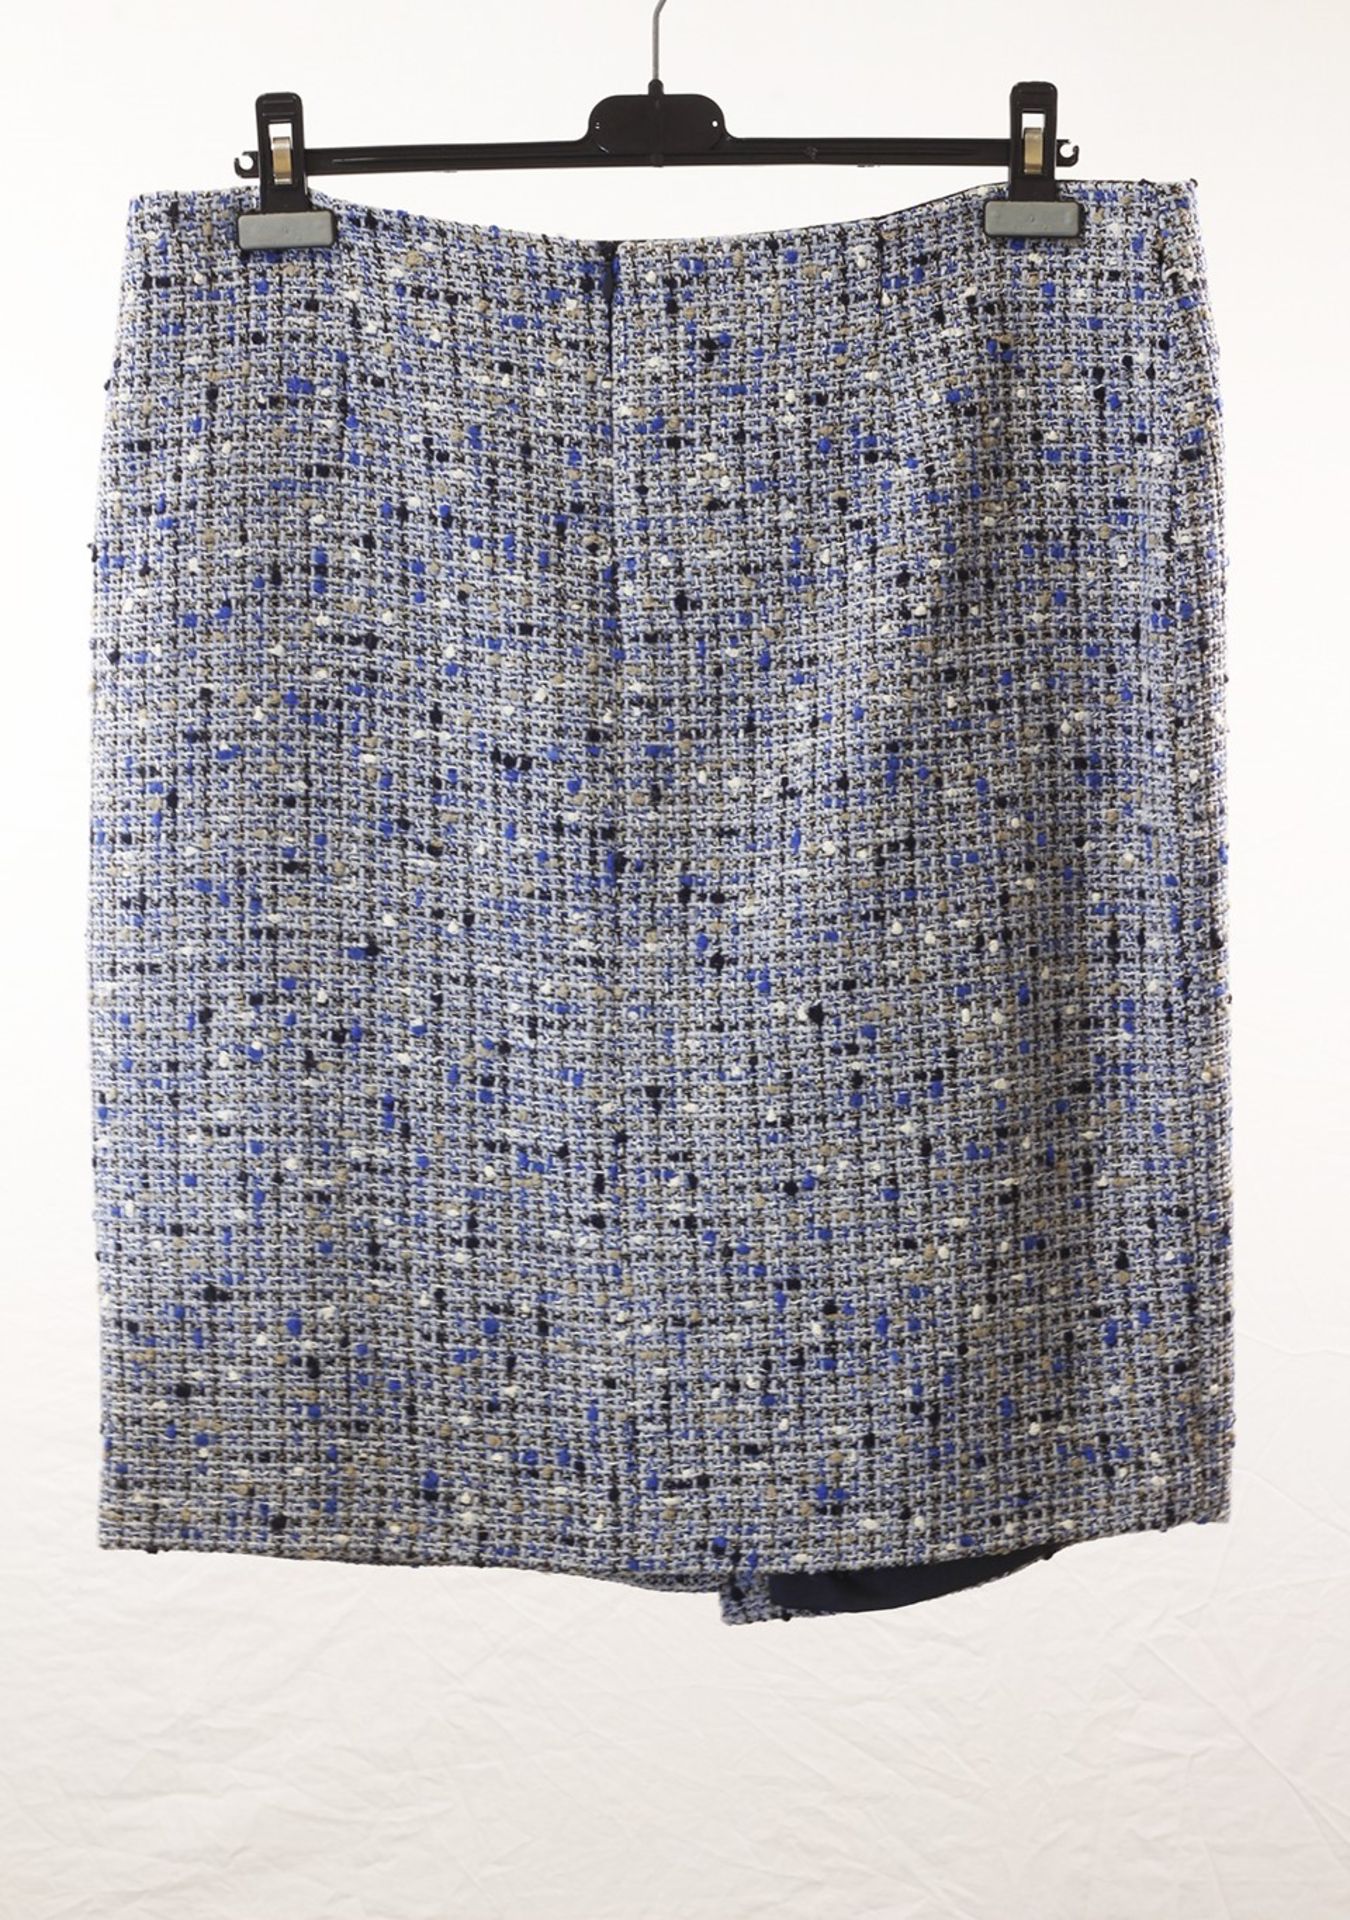 1 x Anne Belin Blue Tweed Skirt - Size: 20 - From A High End Clothing Boutique - Image 5 of 7